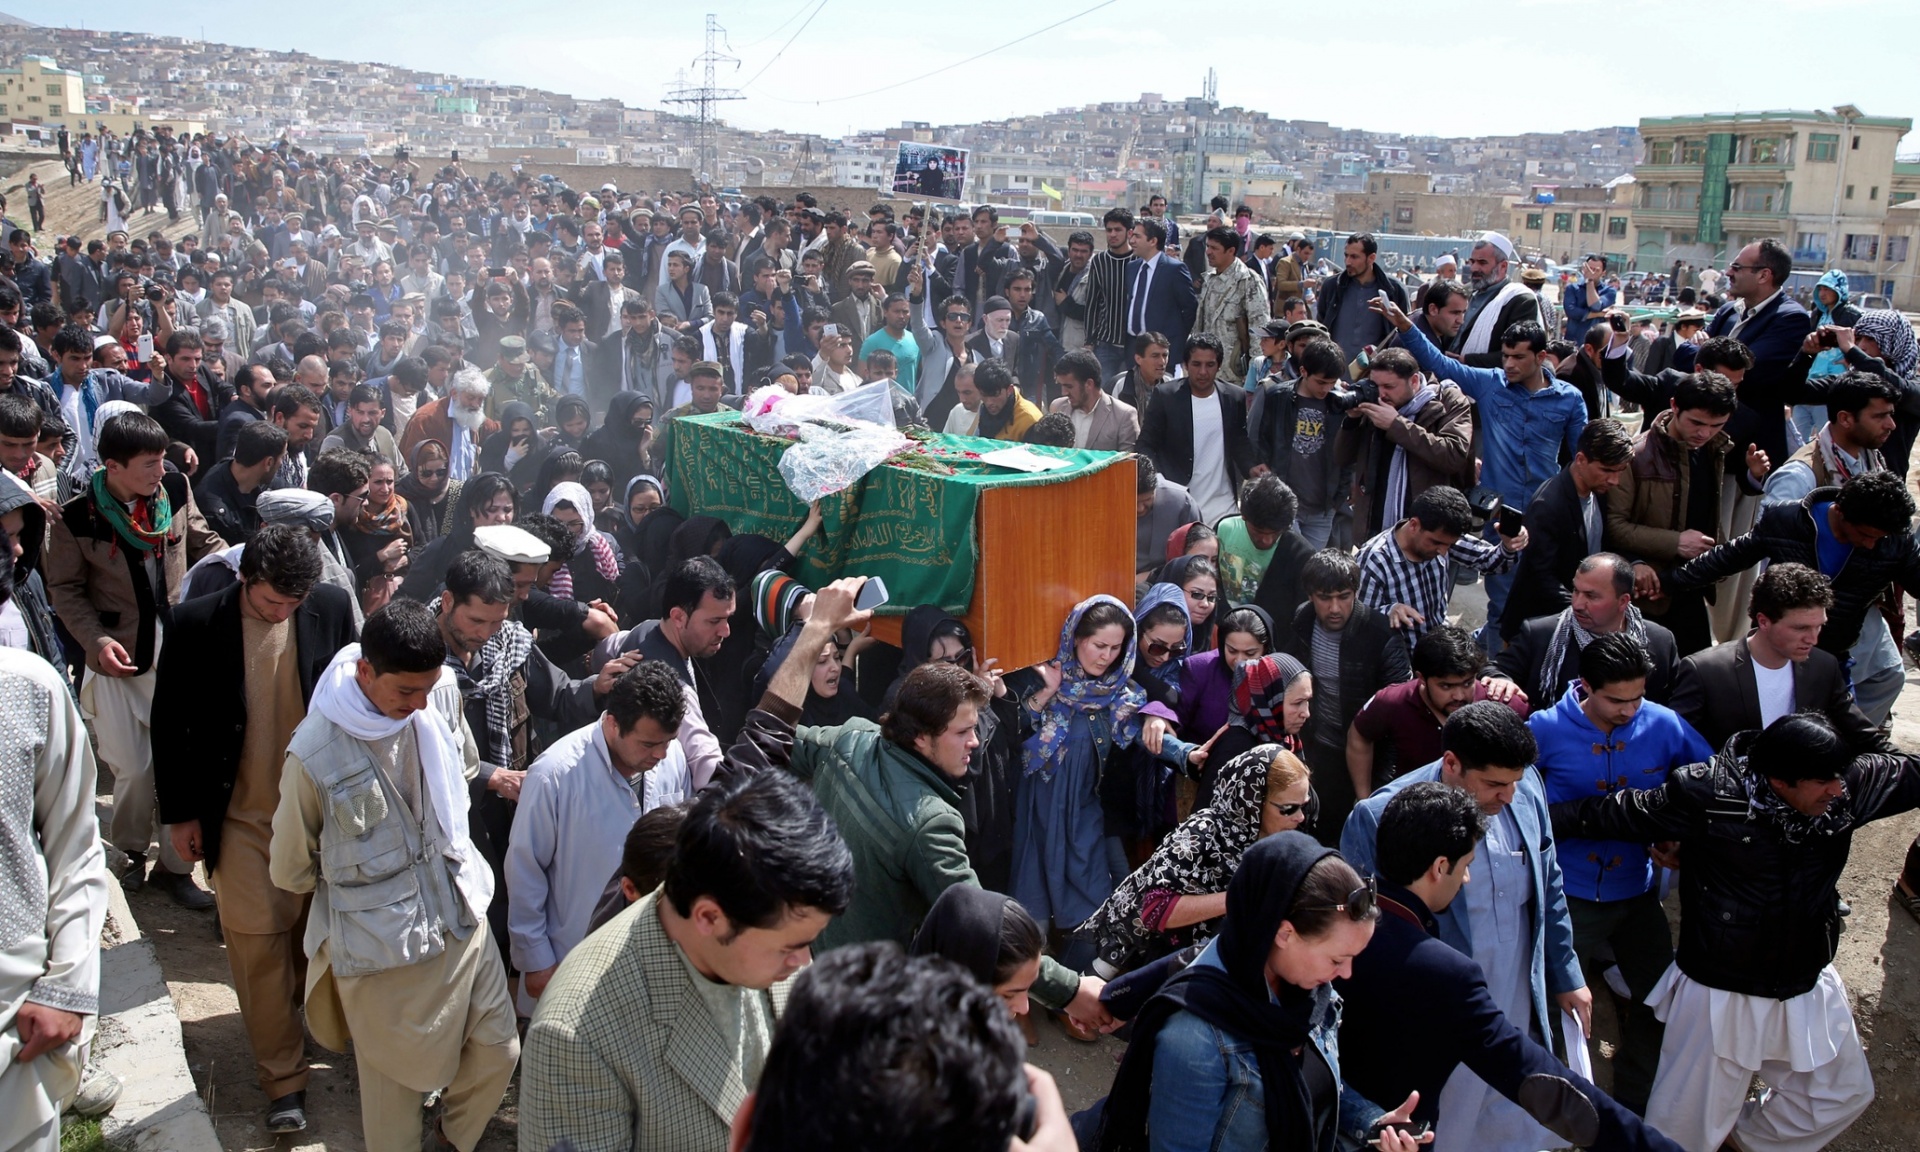 the body of farkhunda 27 who was lynched on thursday by an angry mob in central kabul was carried to the graveyard by women amid crowds of men photo ap